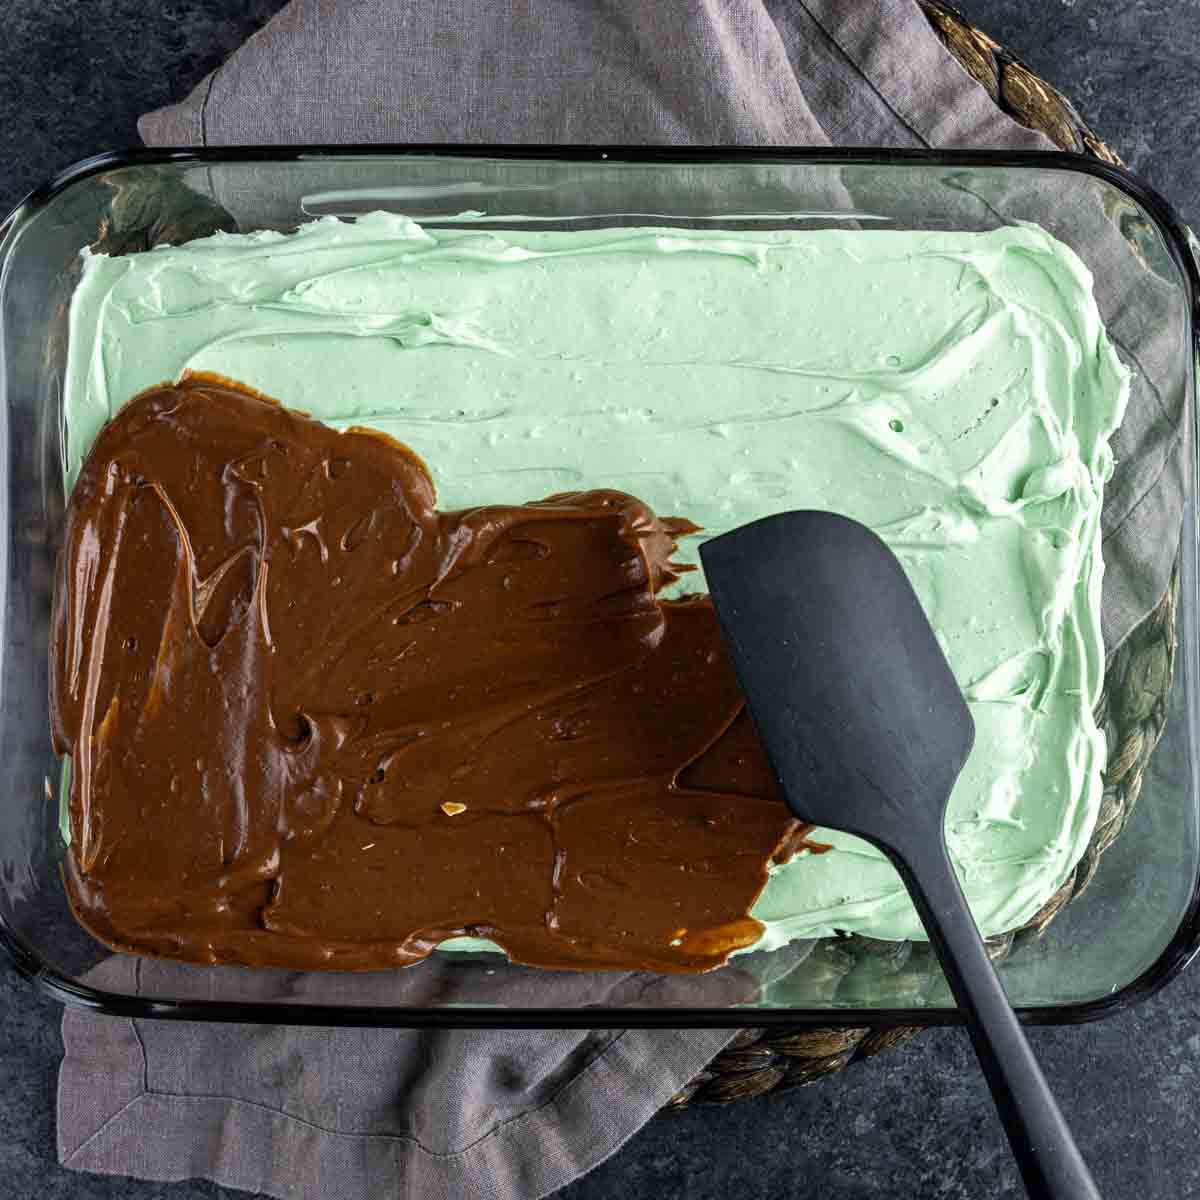 A glass baking dish with mint oreo dessert and a spatula.